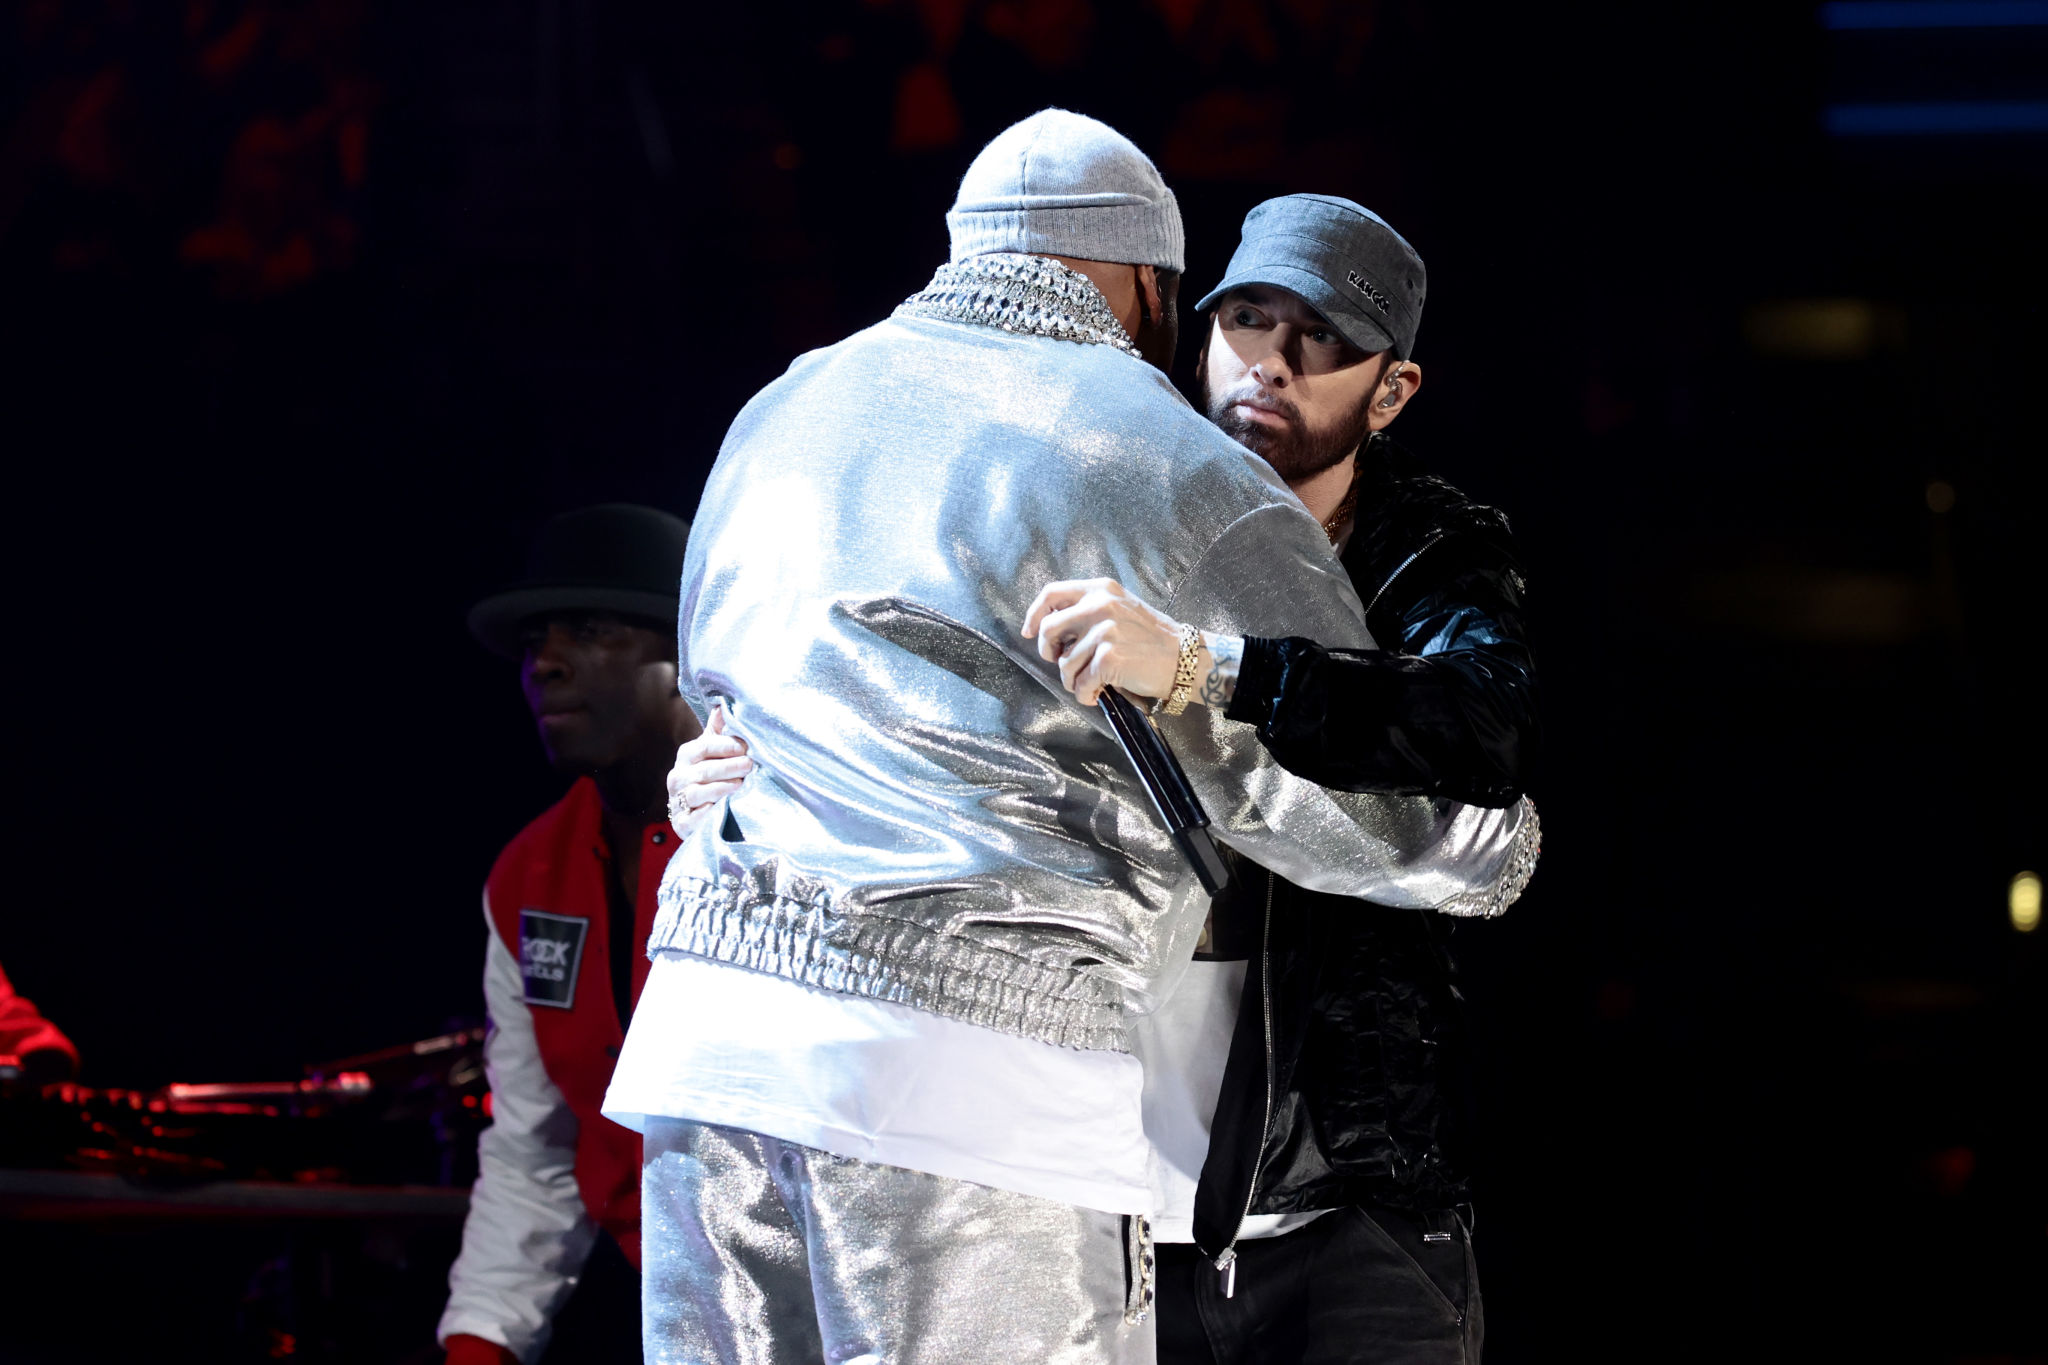 CLEVELAND, OHIO - OCTOBER 30: LL Cool J and Eminem perform onstage during the 36th Annual Rock & Roll Hall Of Fame Induction Ceremony at Rocket Mortgage Fieldhouse on October 30, 2021 in Cleveland, Ohio. (Photo by Dimitrios Kambouris/Getty Images for The Rock and Roll Hall of Fame )